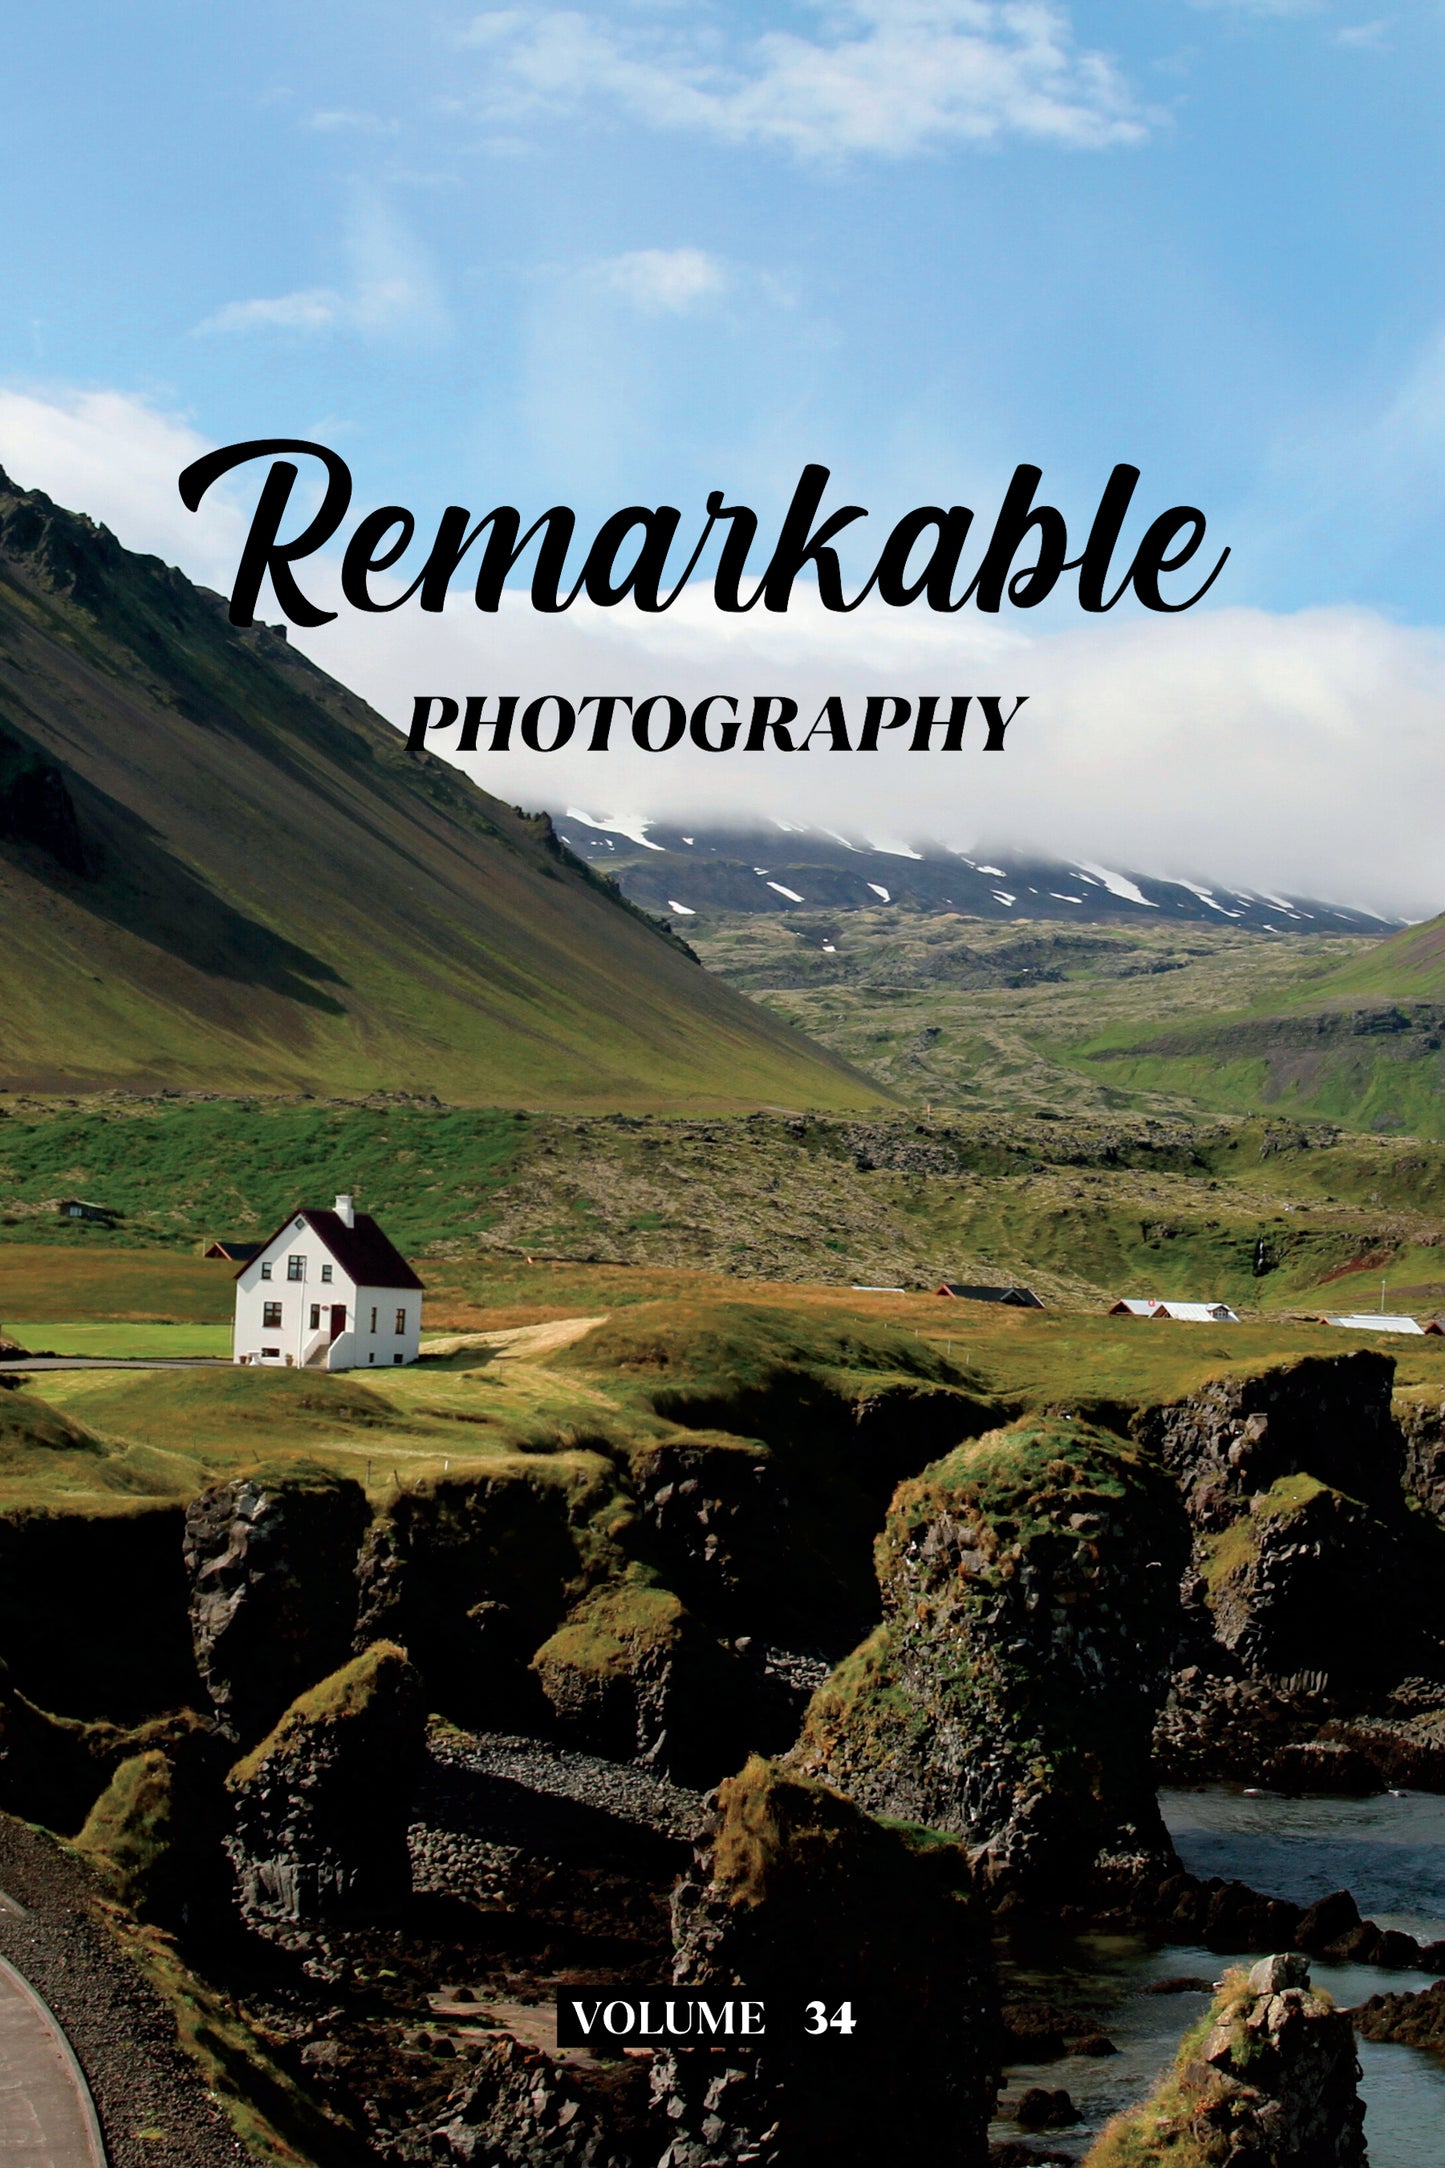 Remarkable Photography Volume 34 (Physical Book Pre-Order)